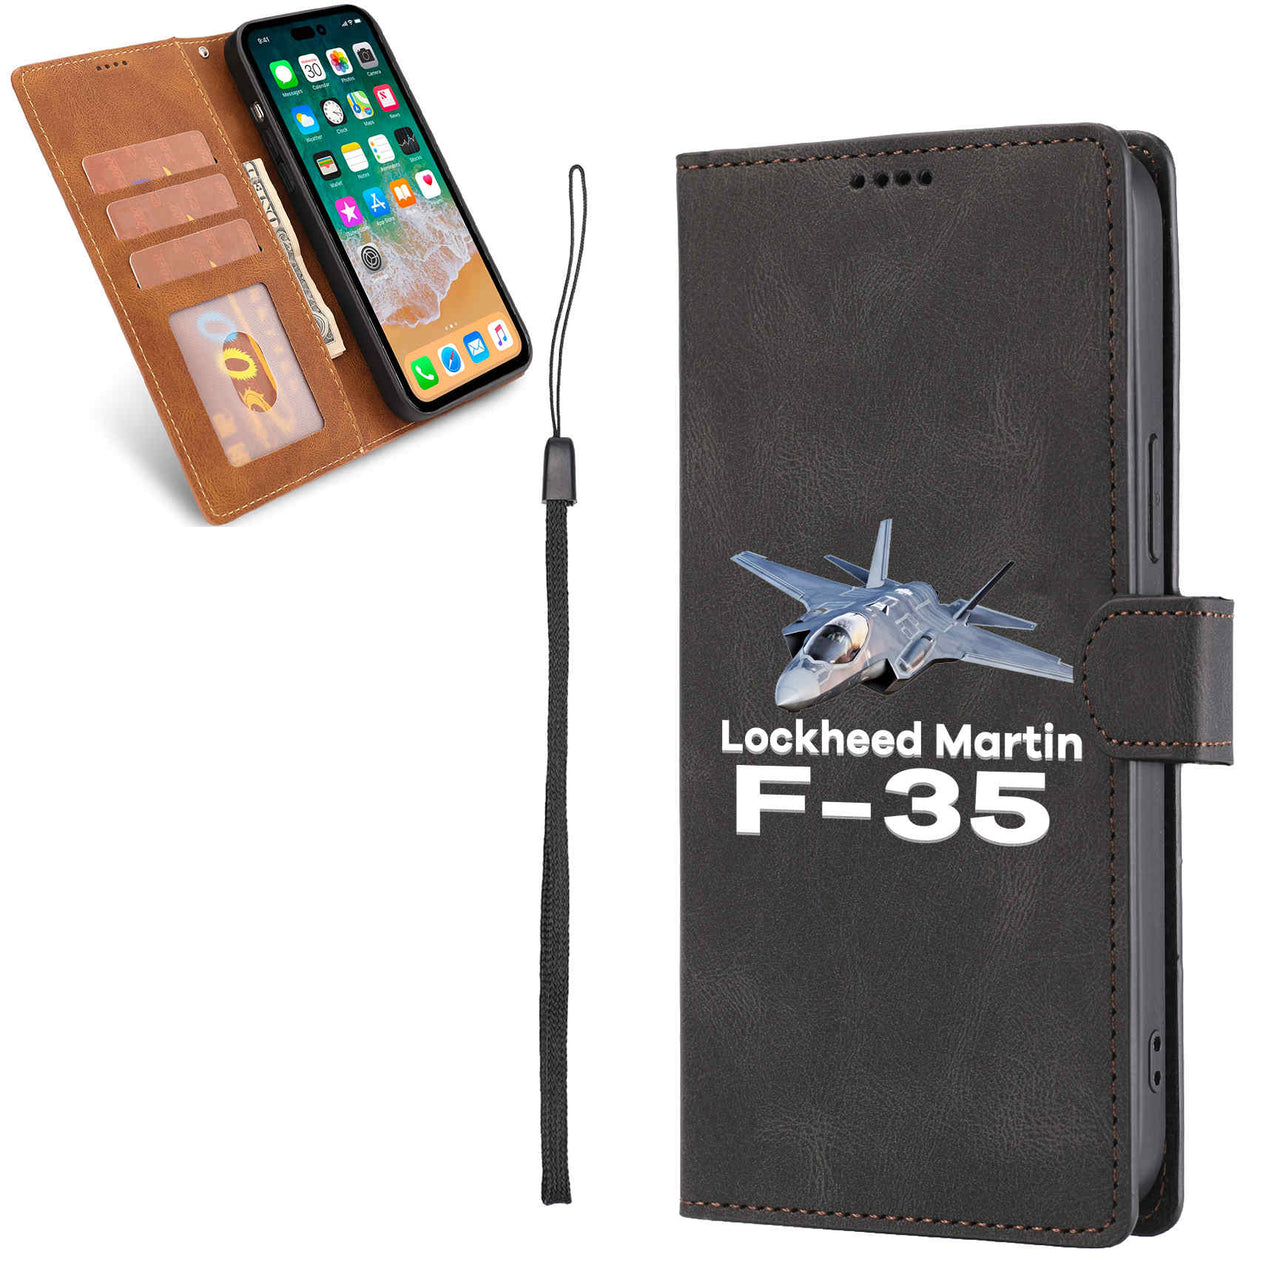 The Lockheed Martin F35 Designed Leather Samsung S & Note Cases